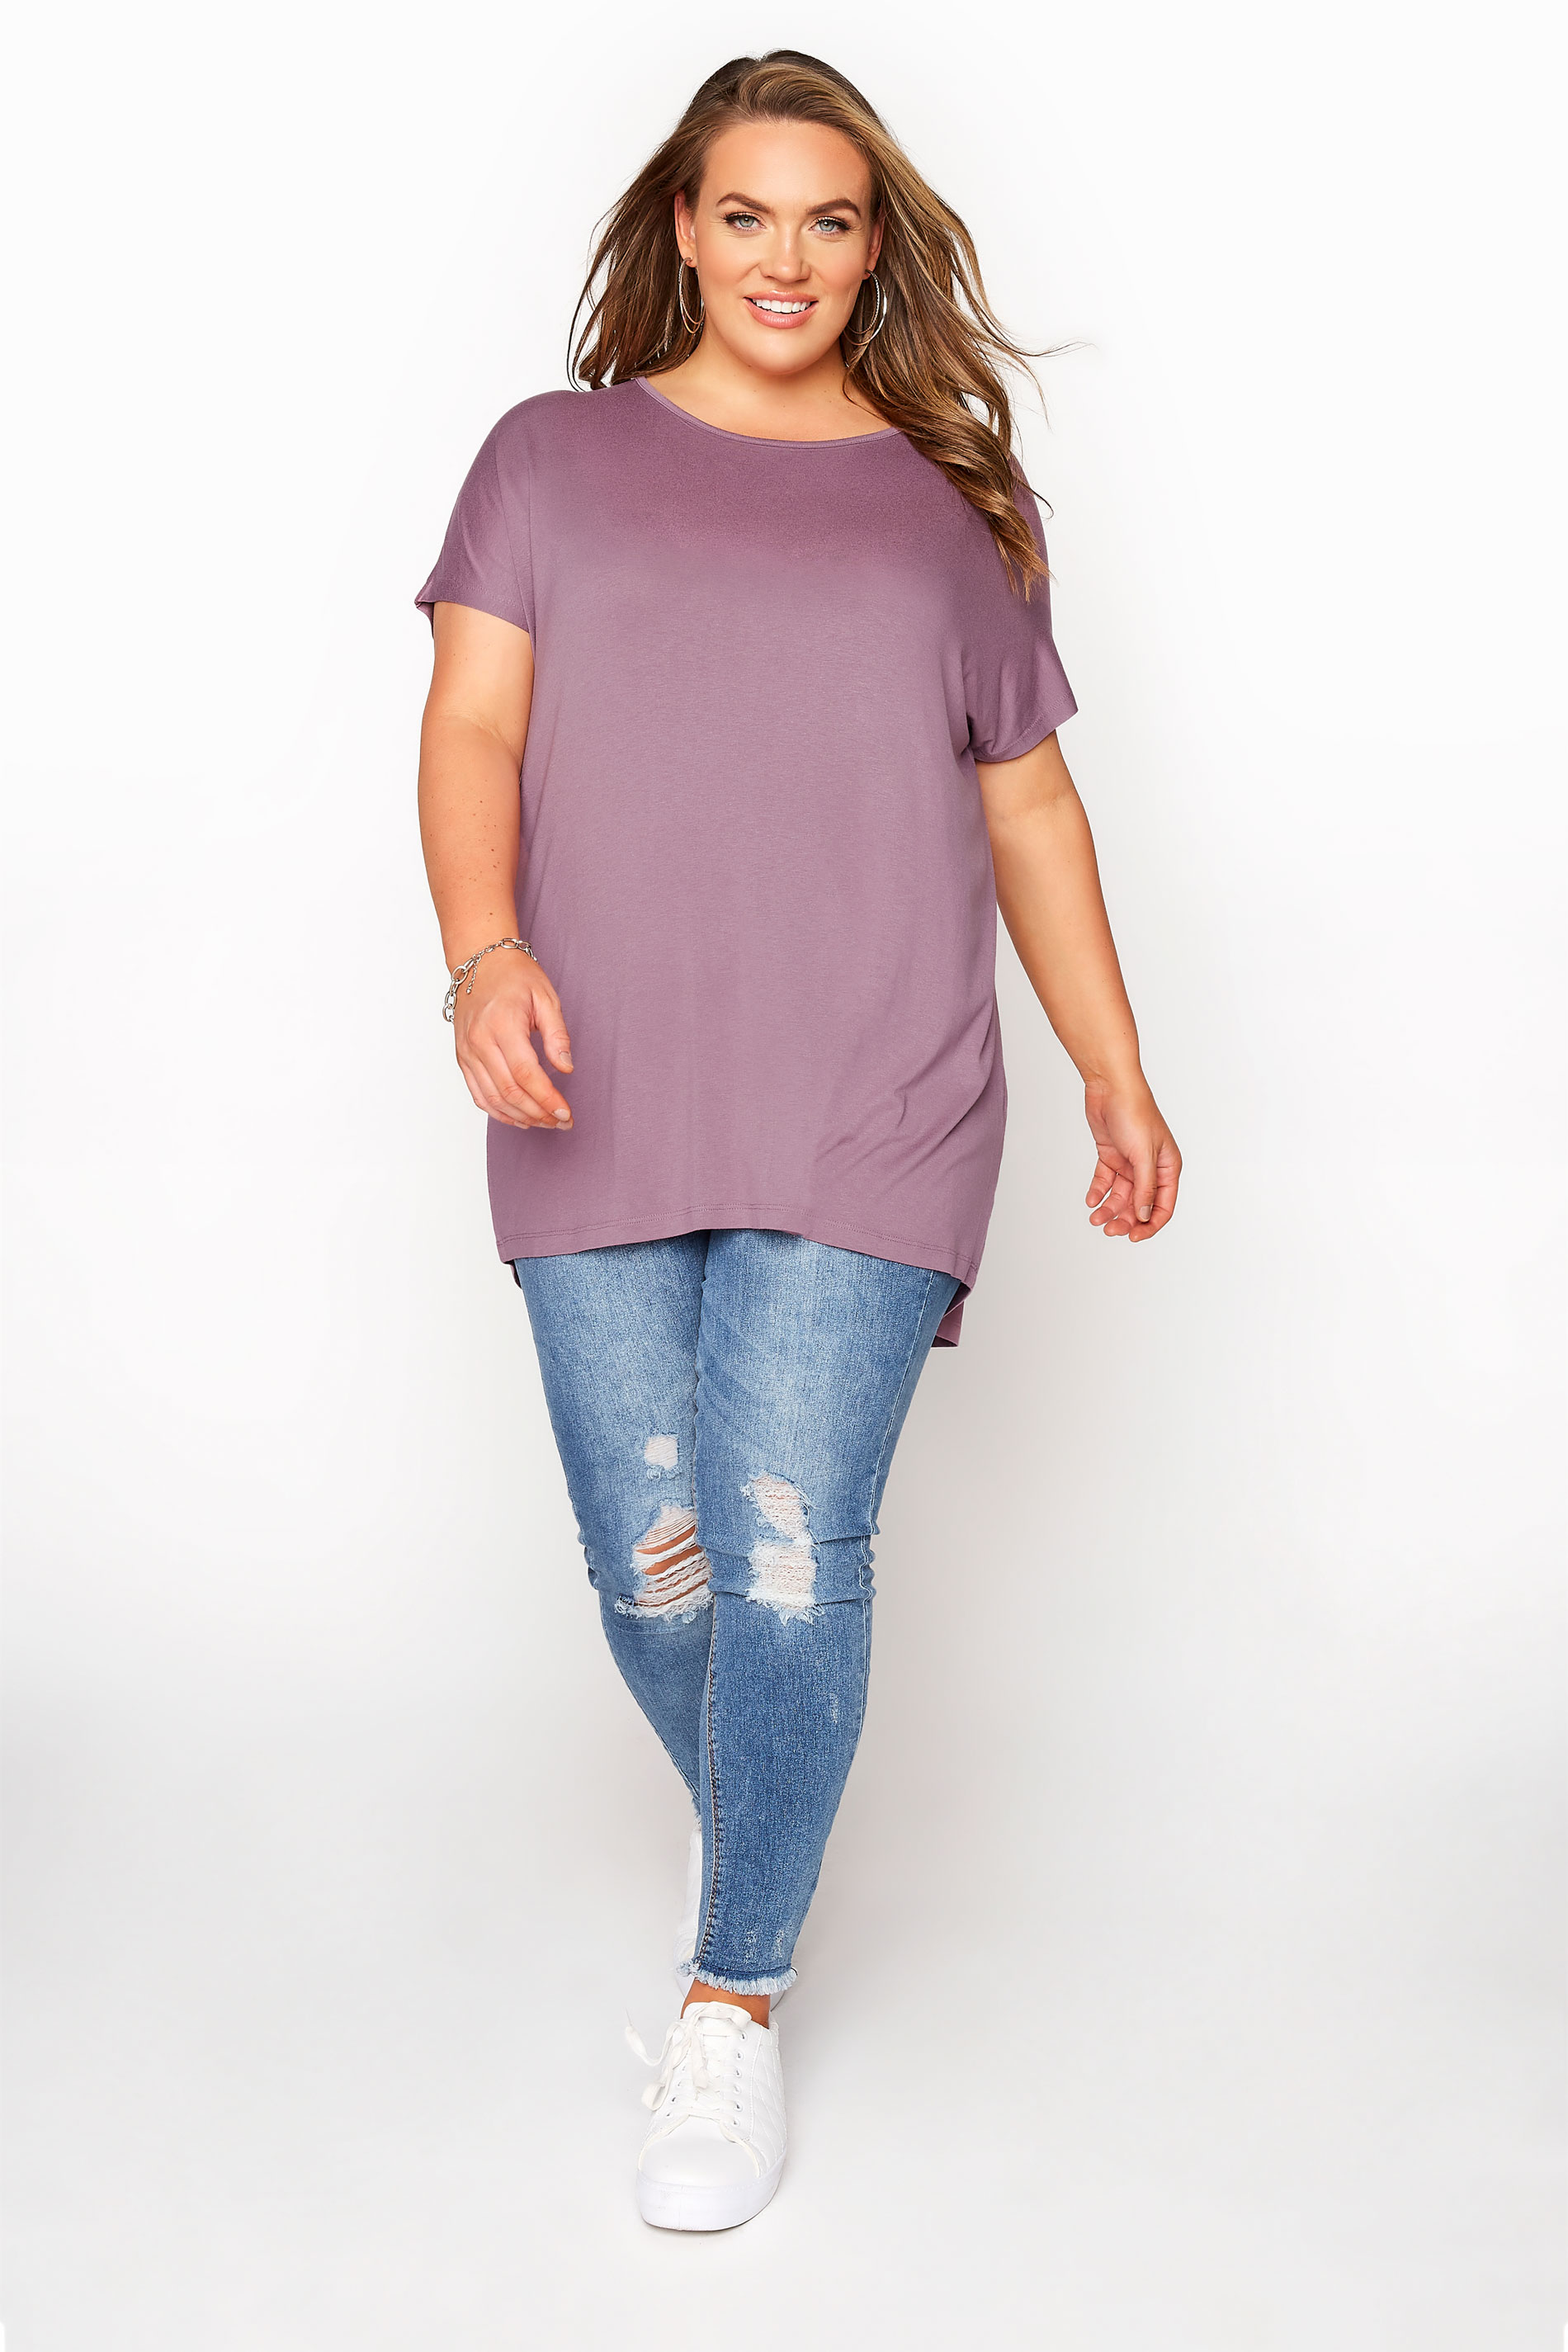 Grande taille  Tops Grande taille  T-Shirts | T-Shirt Mauve Ourlet Plongeant Manches Courtes - MQ09901